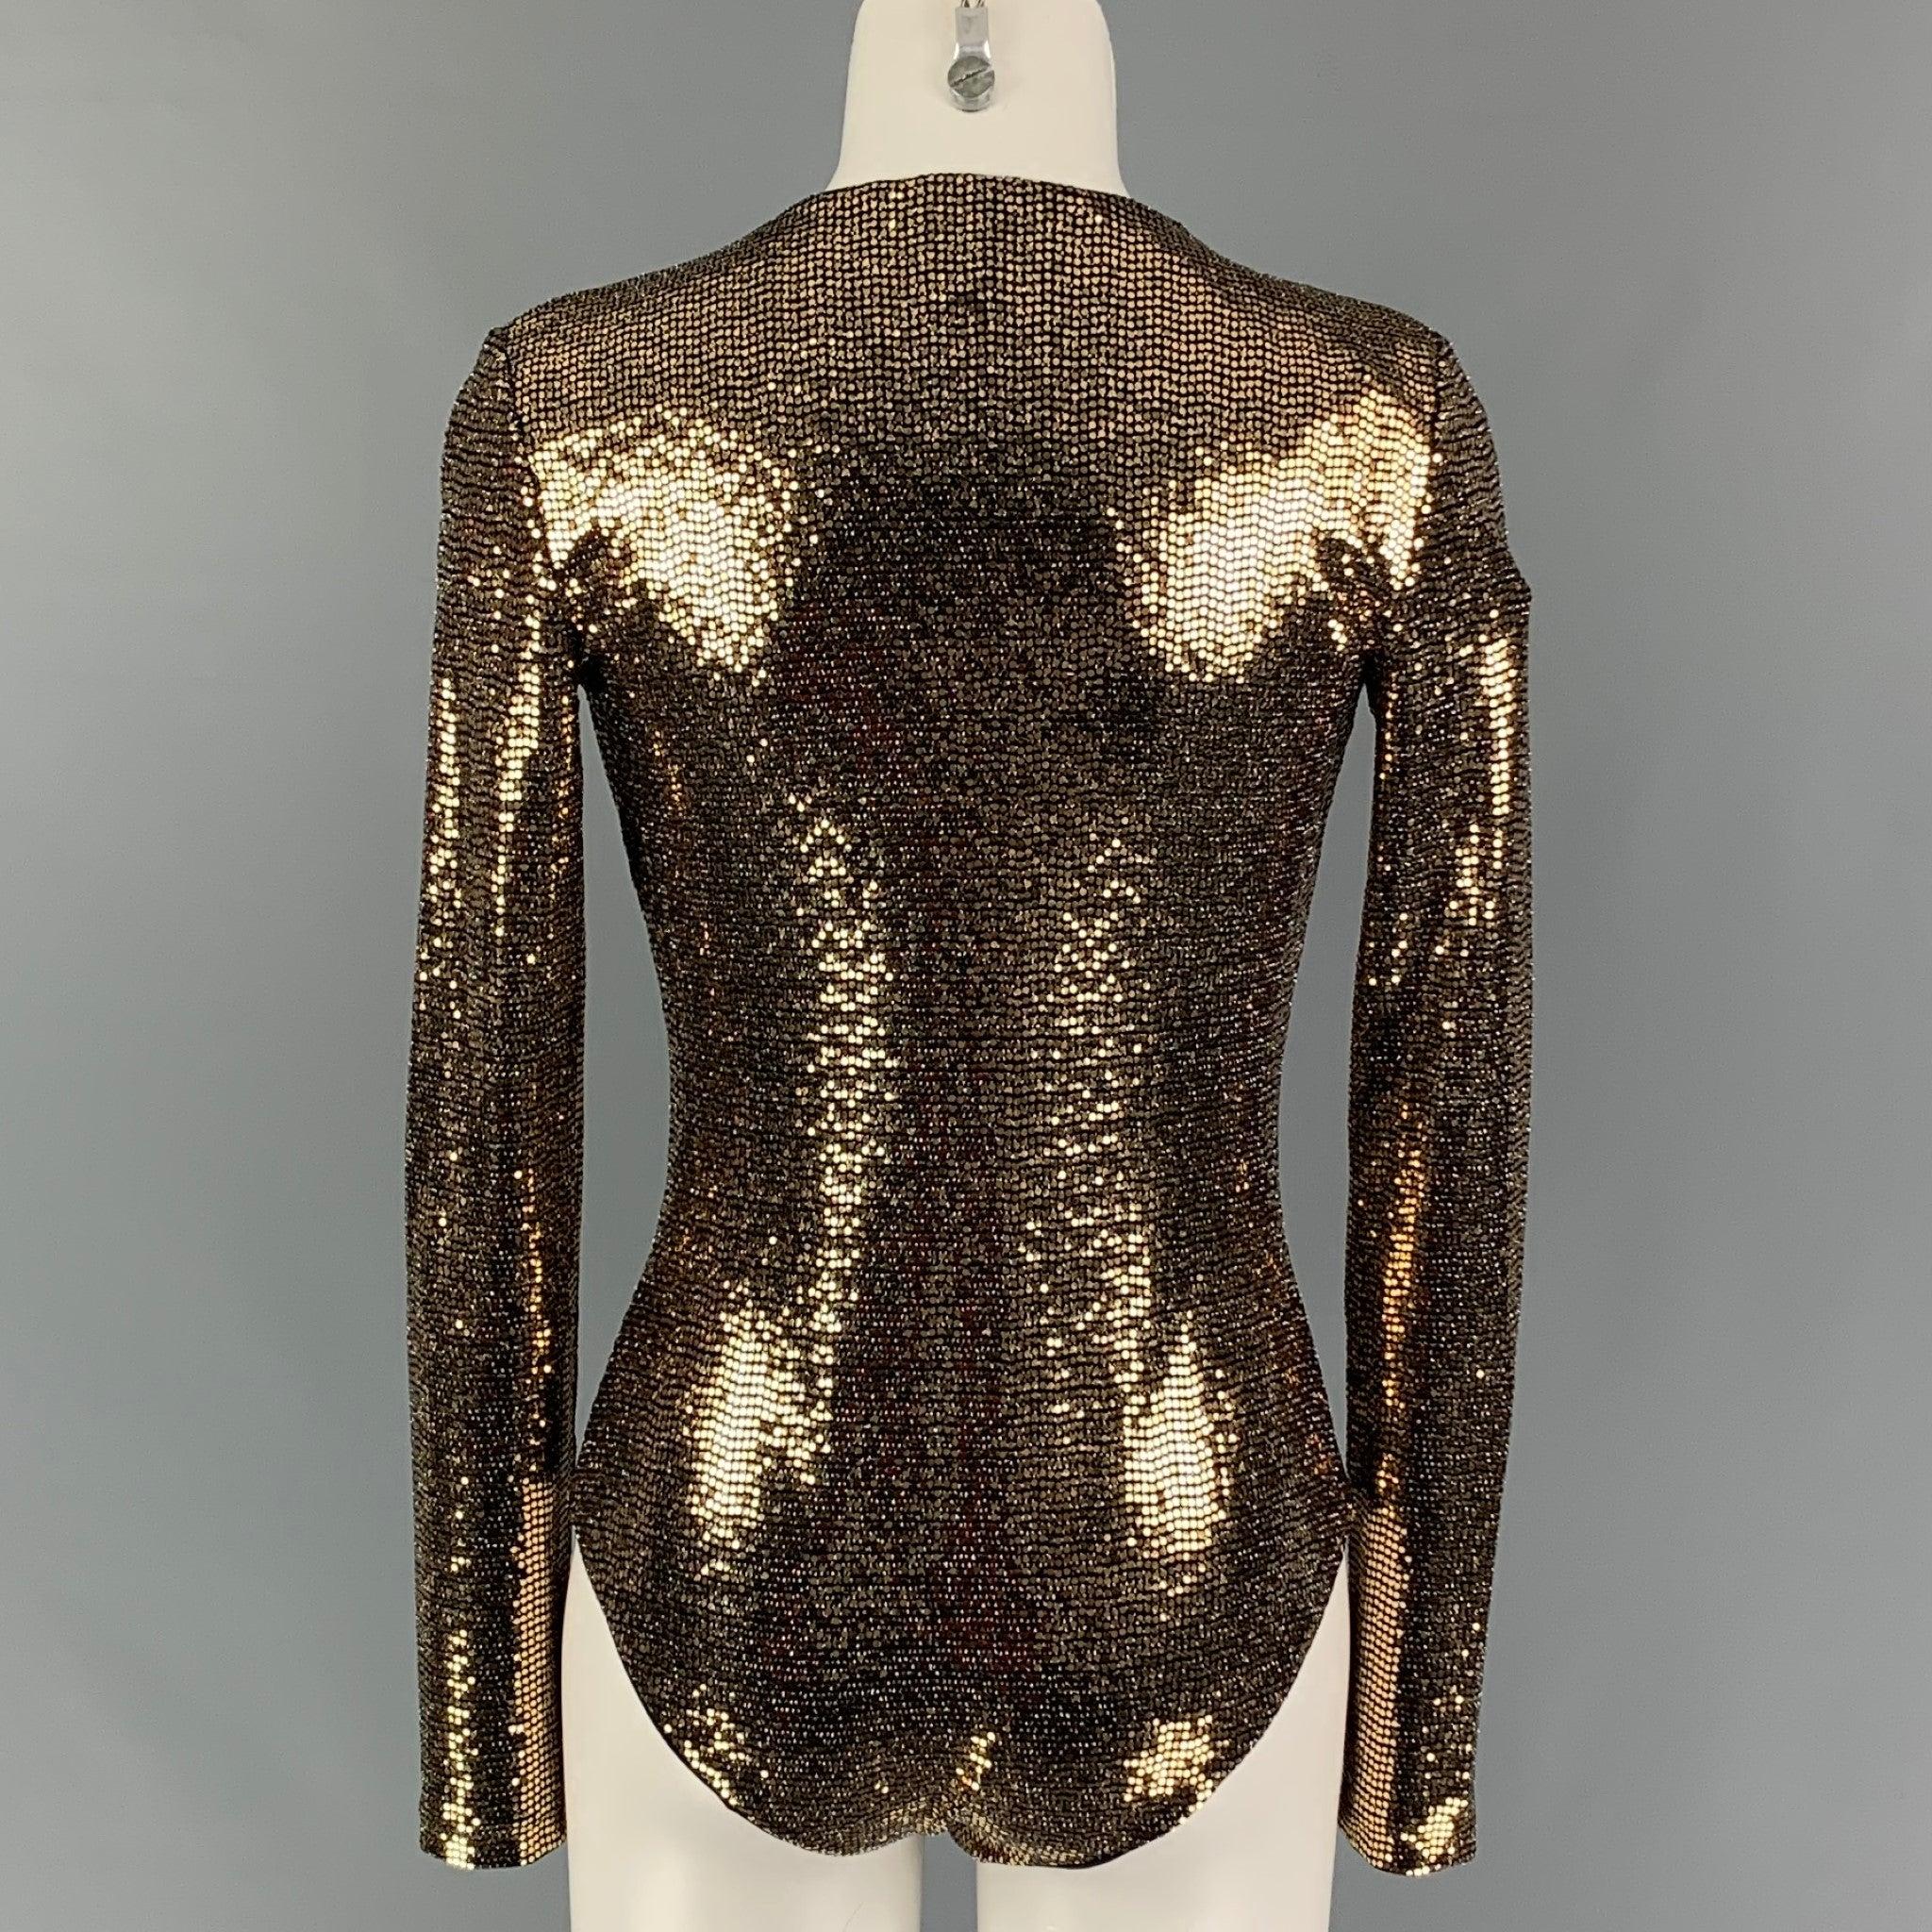 GUCCI Size S Gold Black Polyamide Blend Metallic Body Suit Dress Top In Excellent Condition For Sale In San Francisco, CA